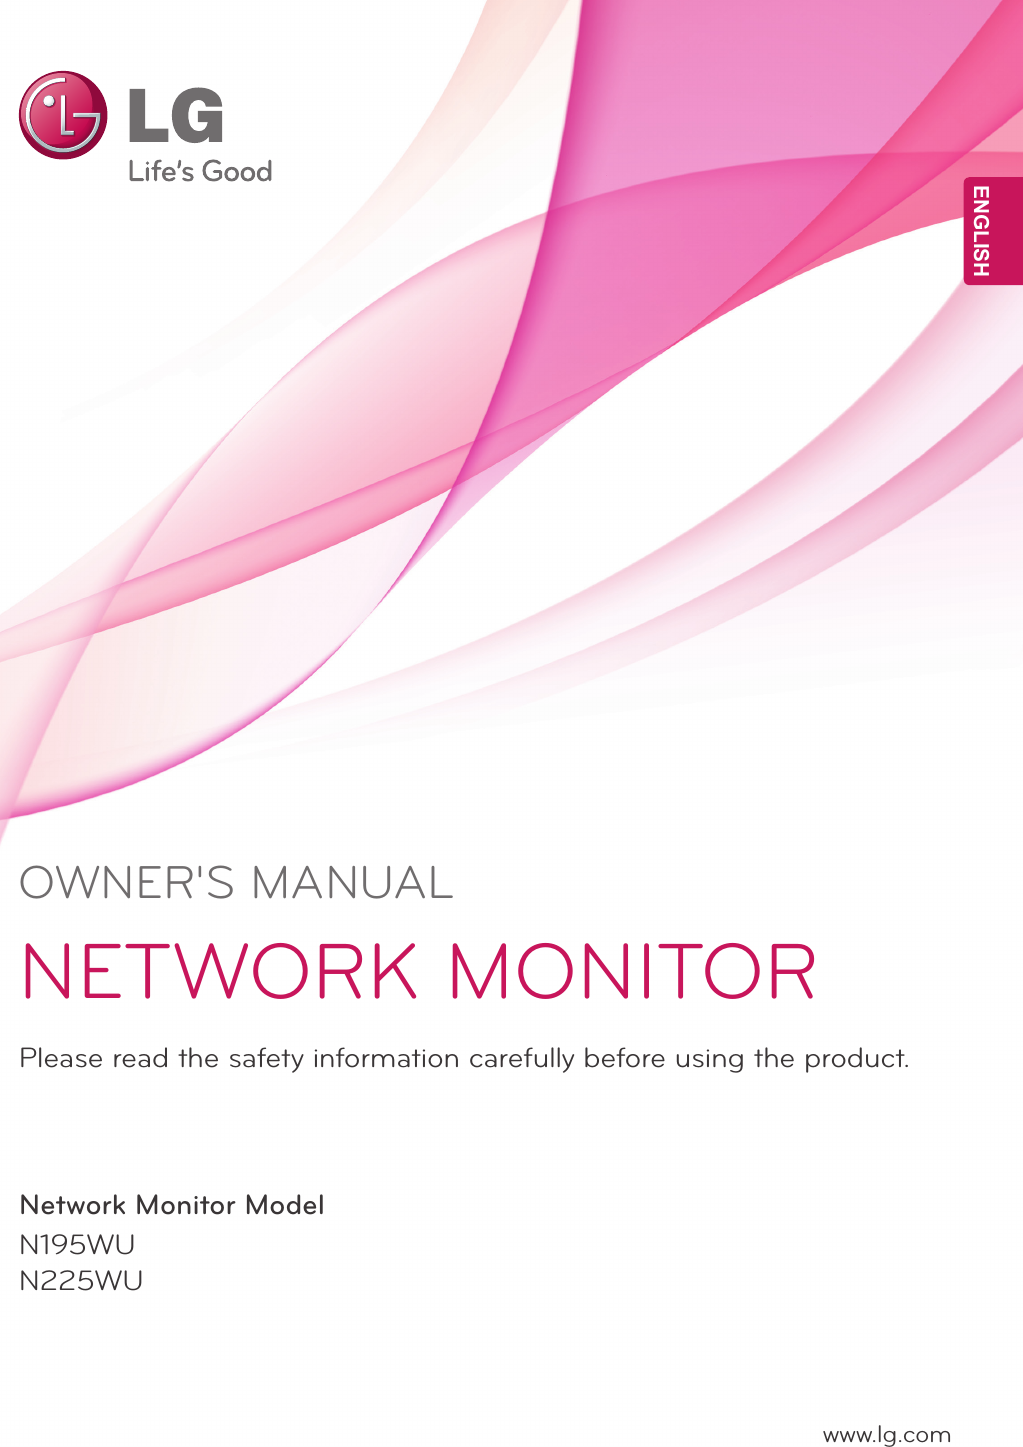 www.lg.comOWNER&apos;S MANUALNETWORK MONITORN195WUN225WUPlease read the safety information carefully before using the product.Network Monitor ModelENGLISH